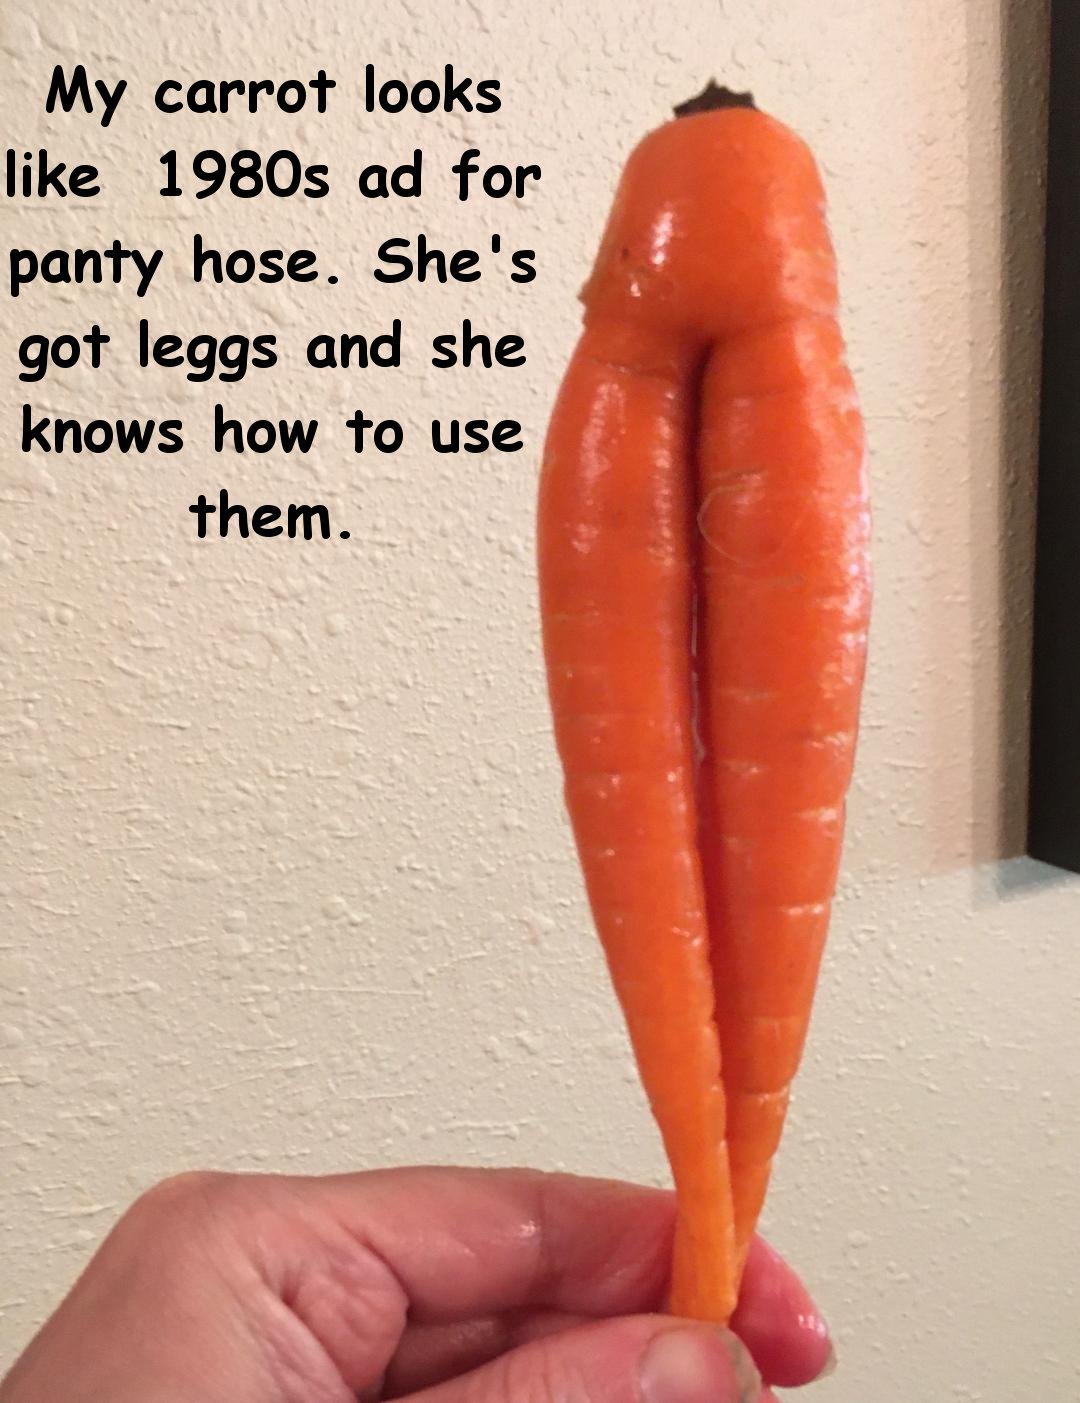 child's dream - My carrot looks 1980s ad for panty hose. She's got leggs and she knows how to use them.